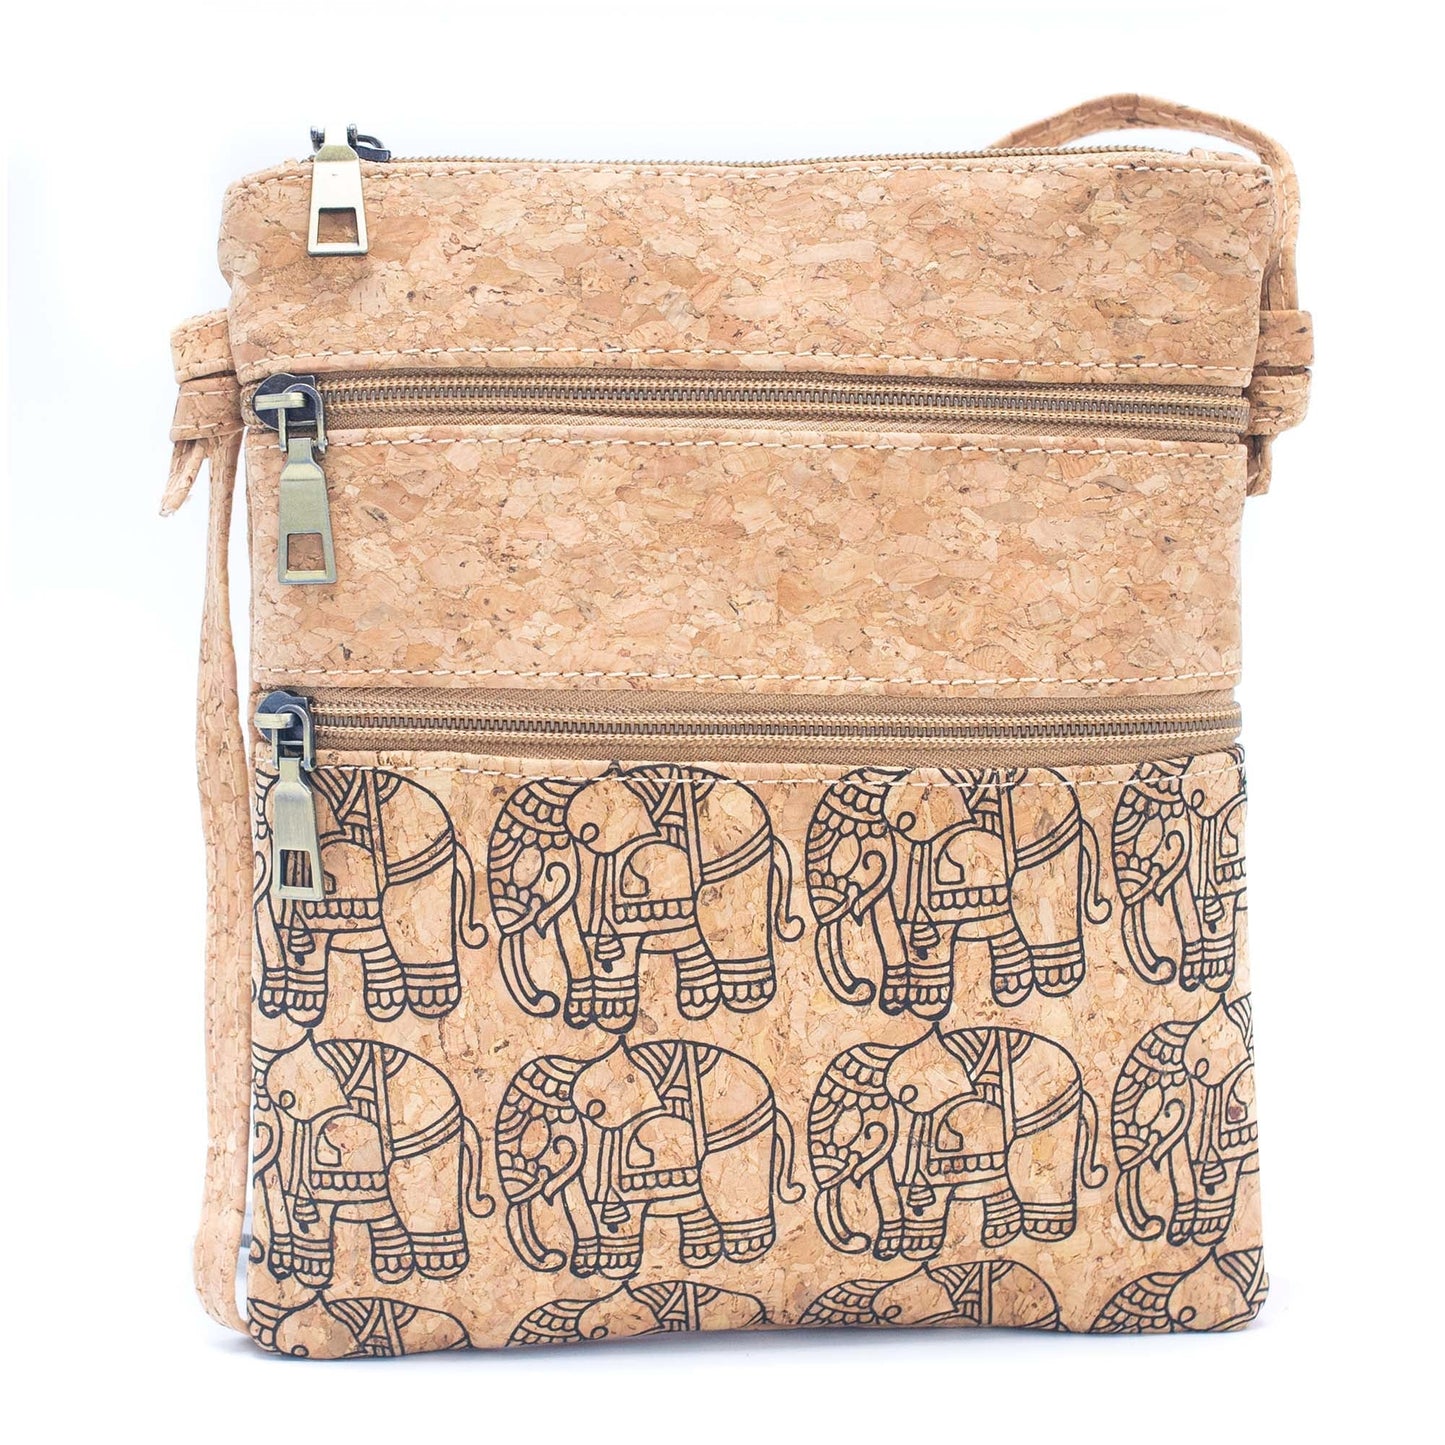 Patterned Double Zipper Vegan Crossbody Bag | THE CORK COLLECTION